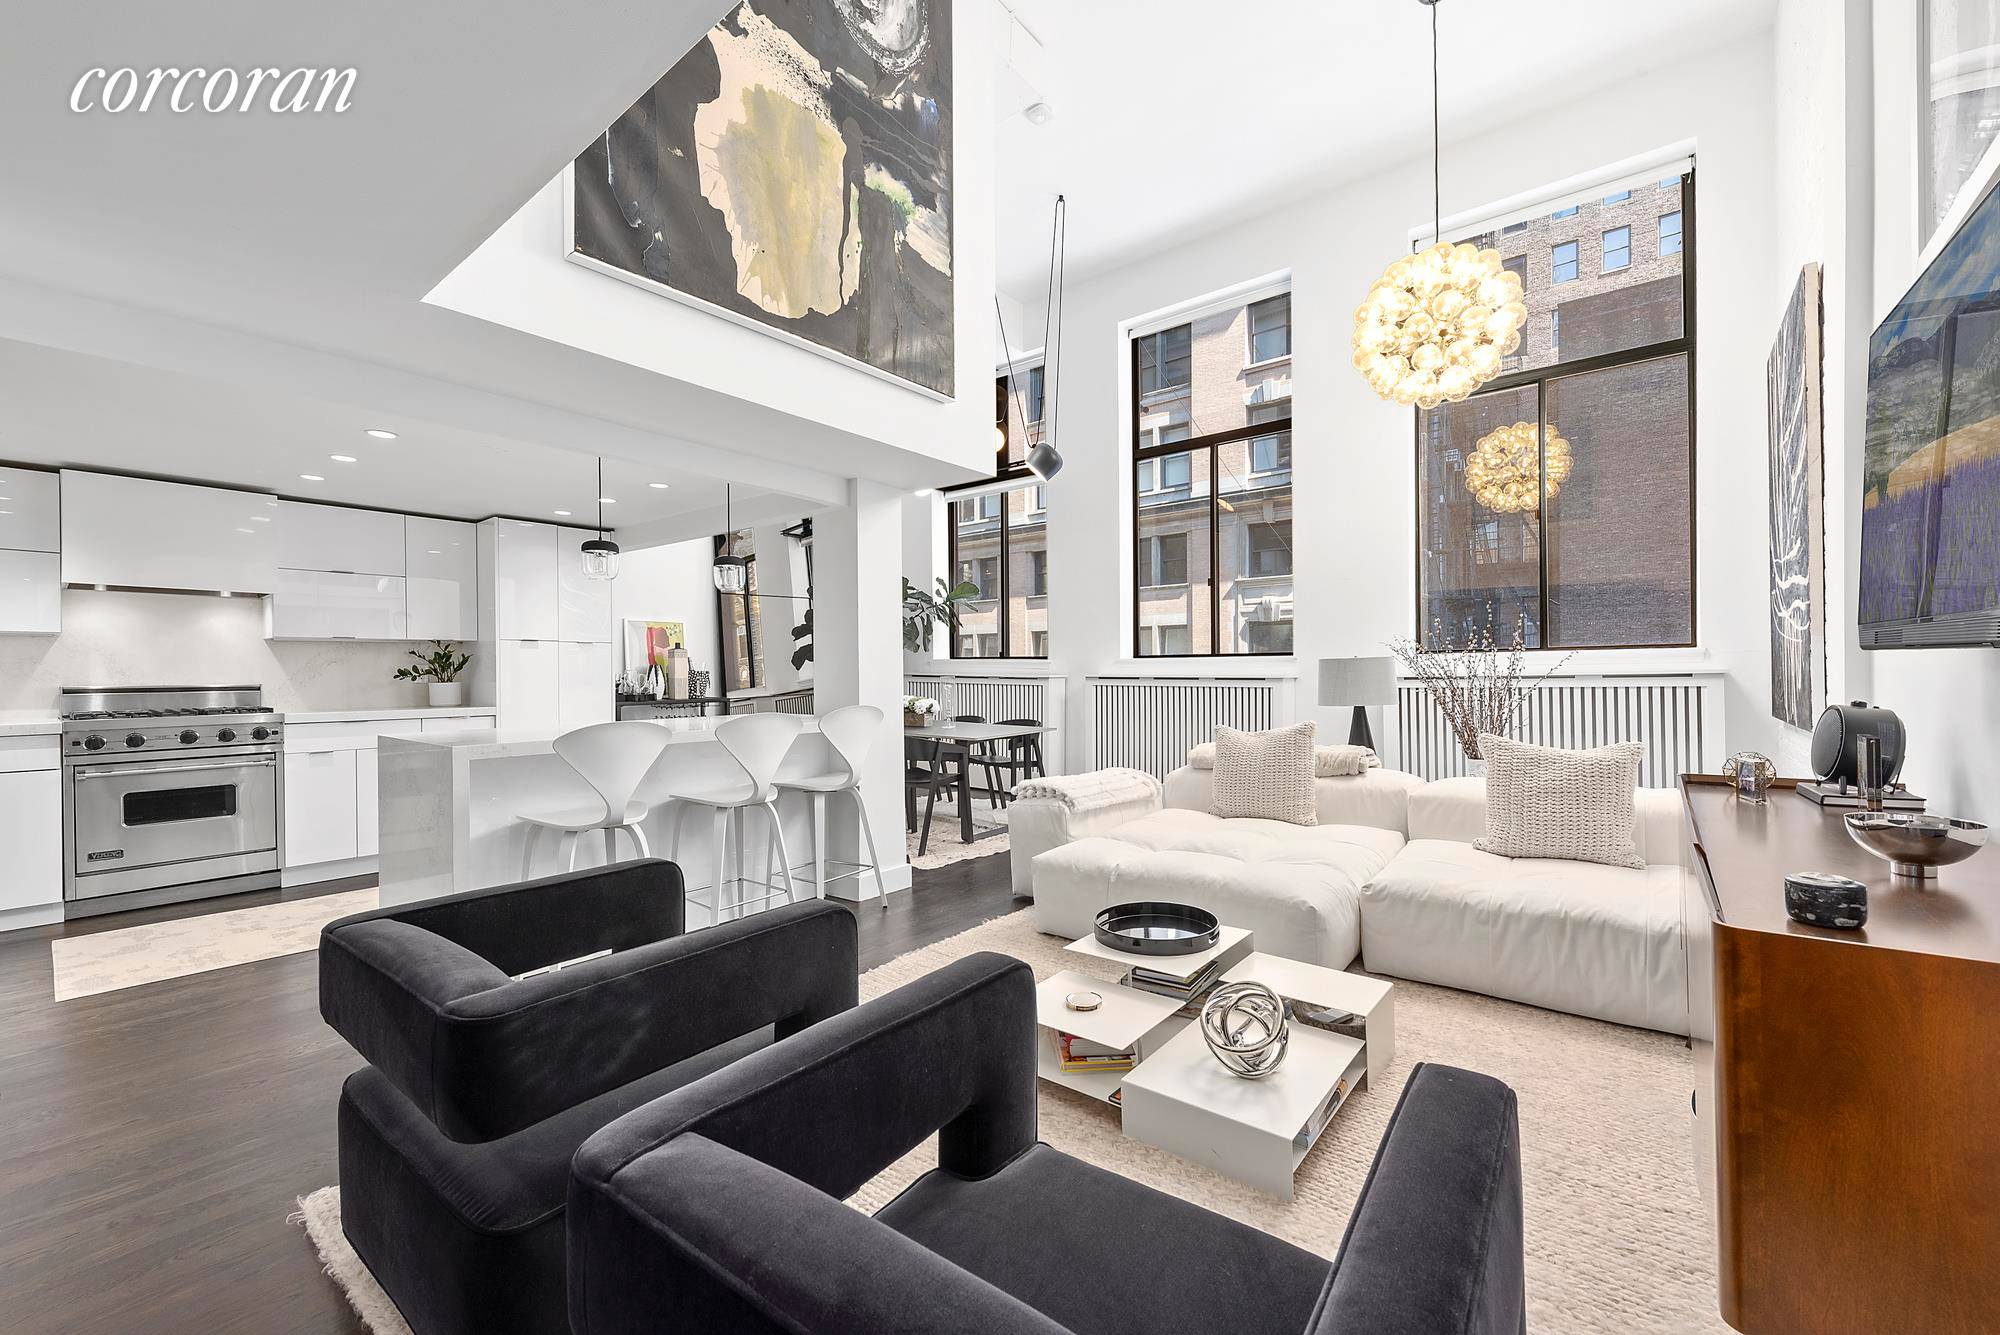 Sleek minimalist design and expansive living space define this light filled, meticulously renovated three bedroom, two bathroom duplex loft in a historic Flatiron cooperative.